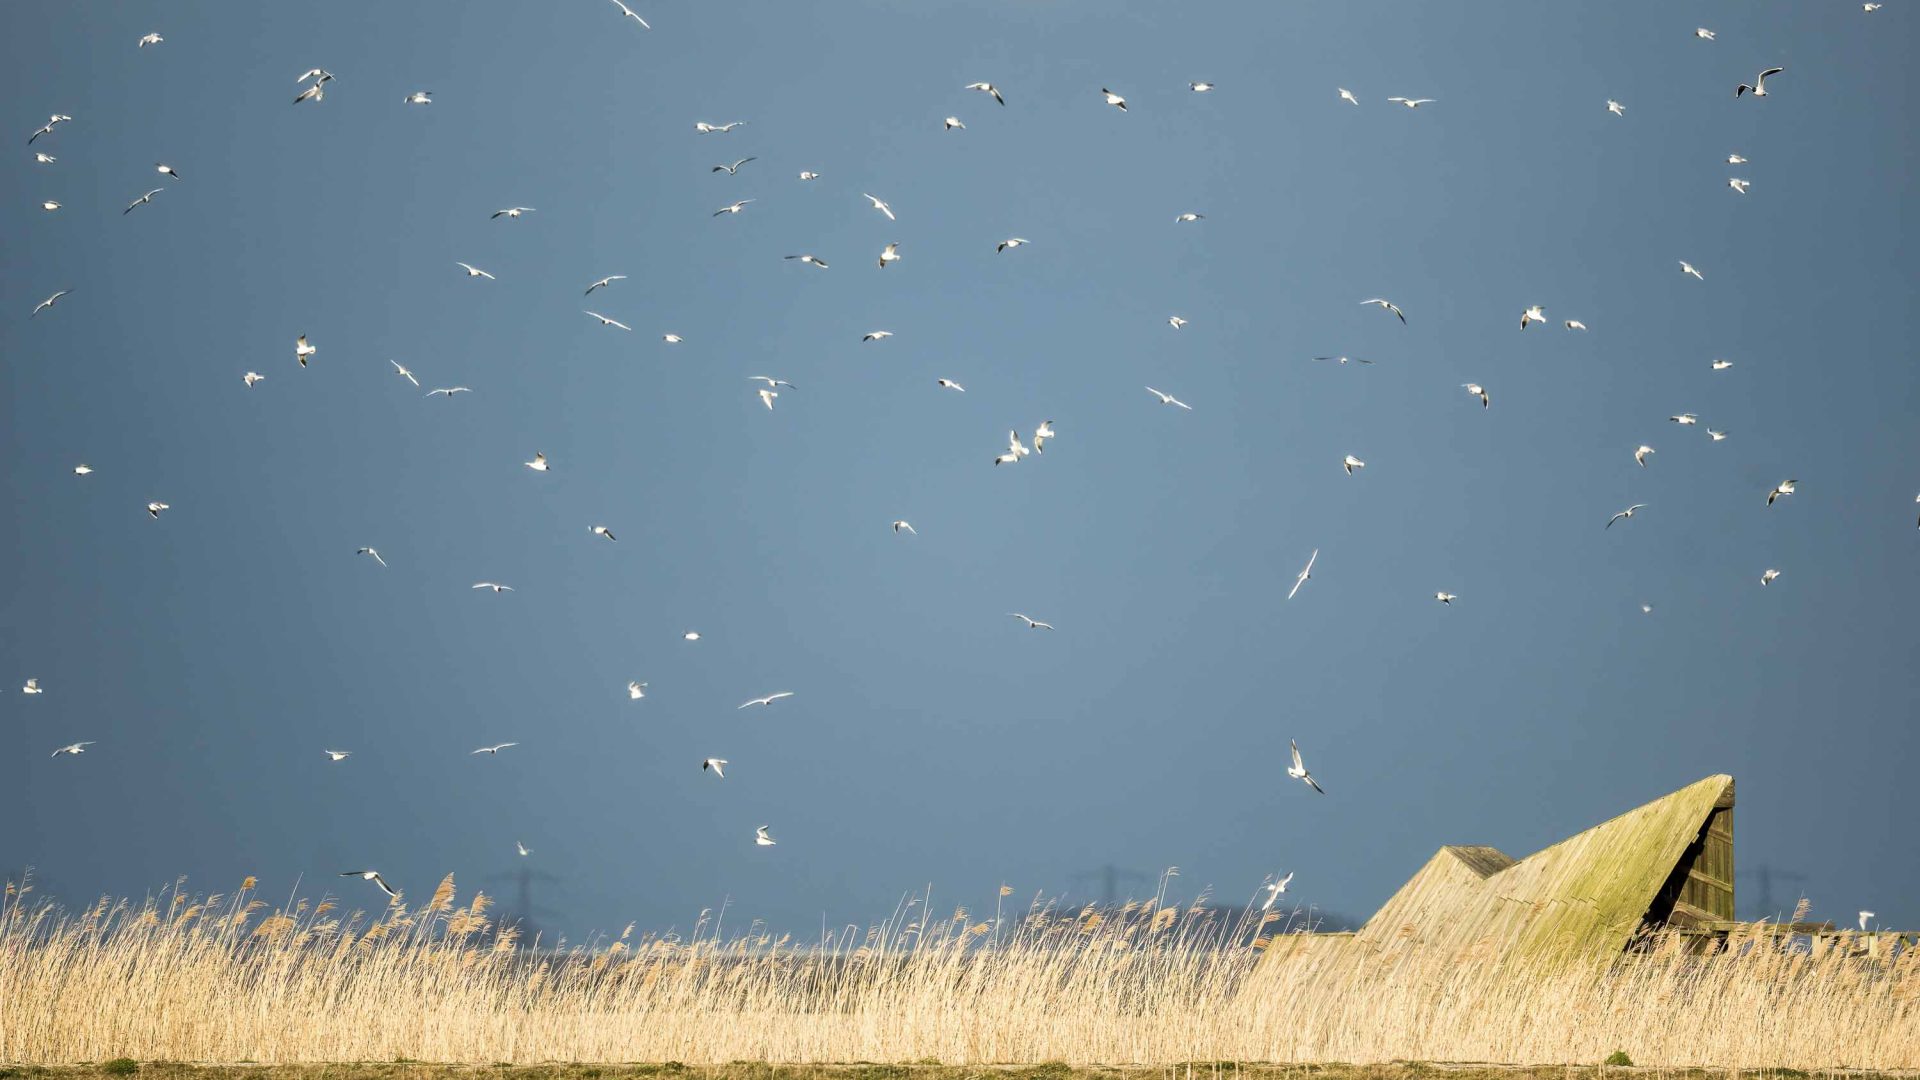 Birds fly in a blue sky above yellow grasses.